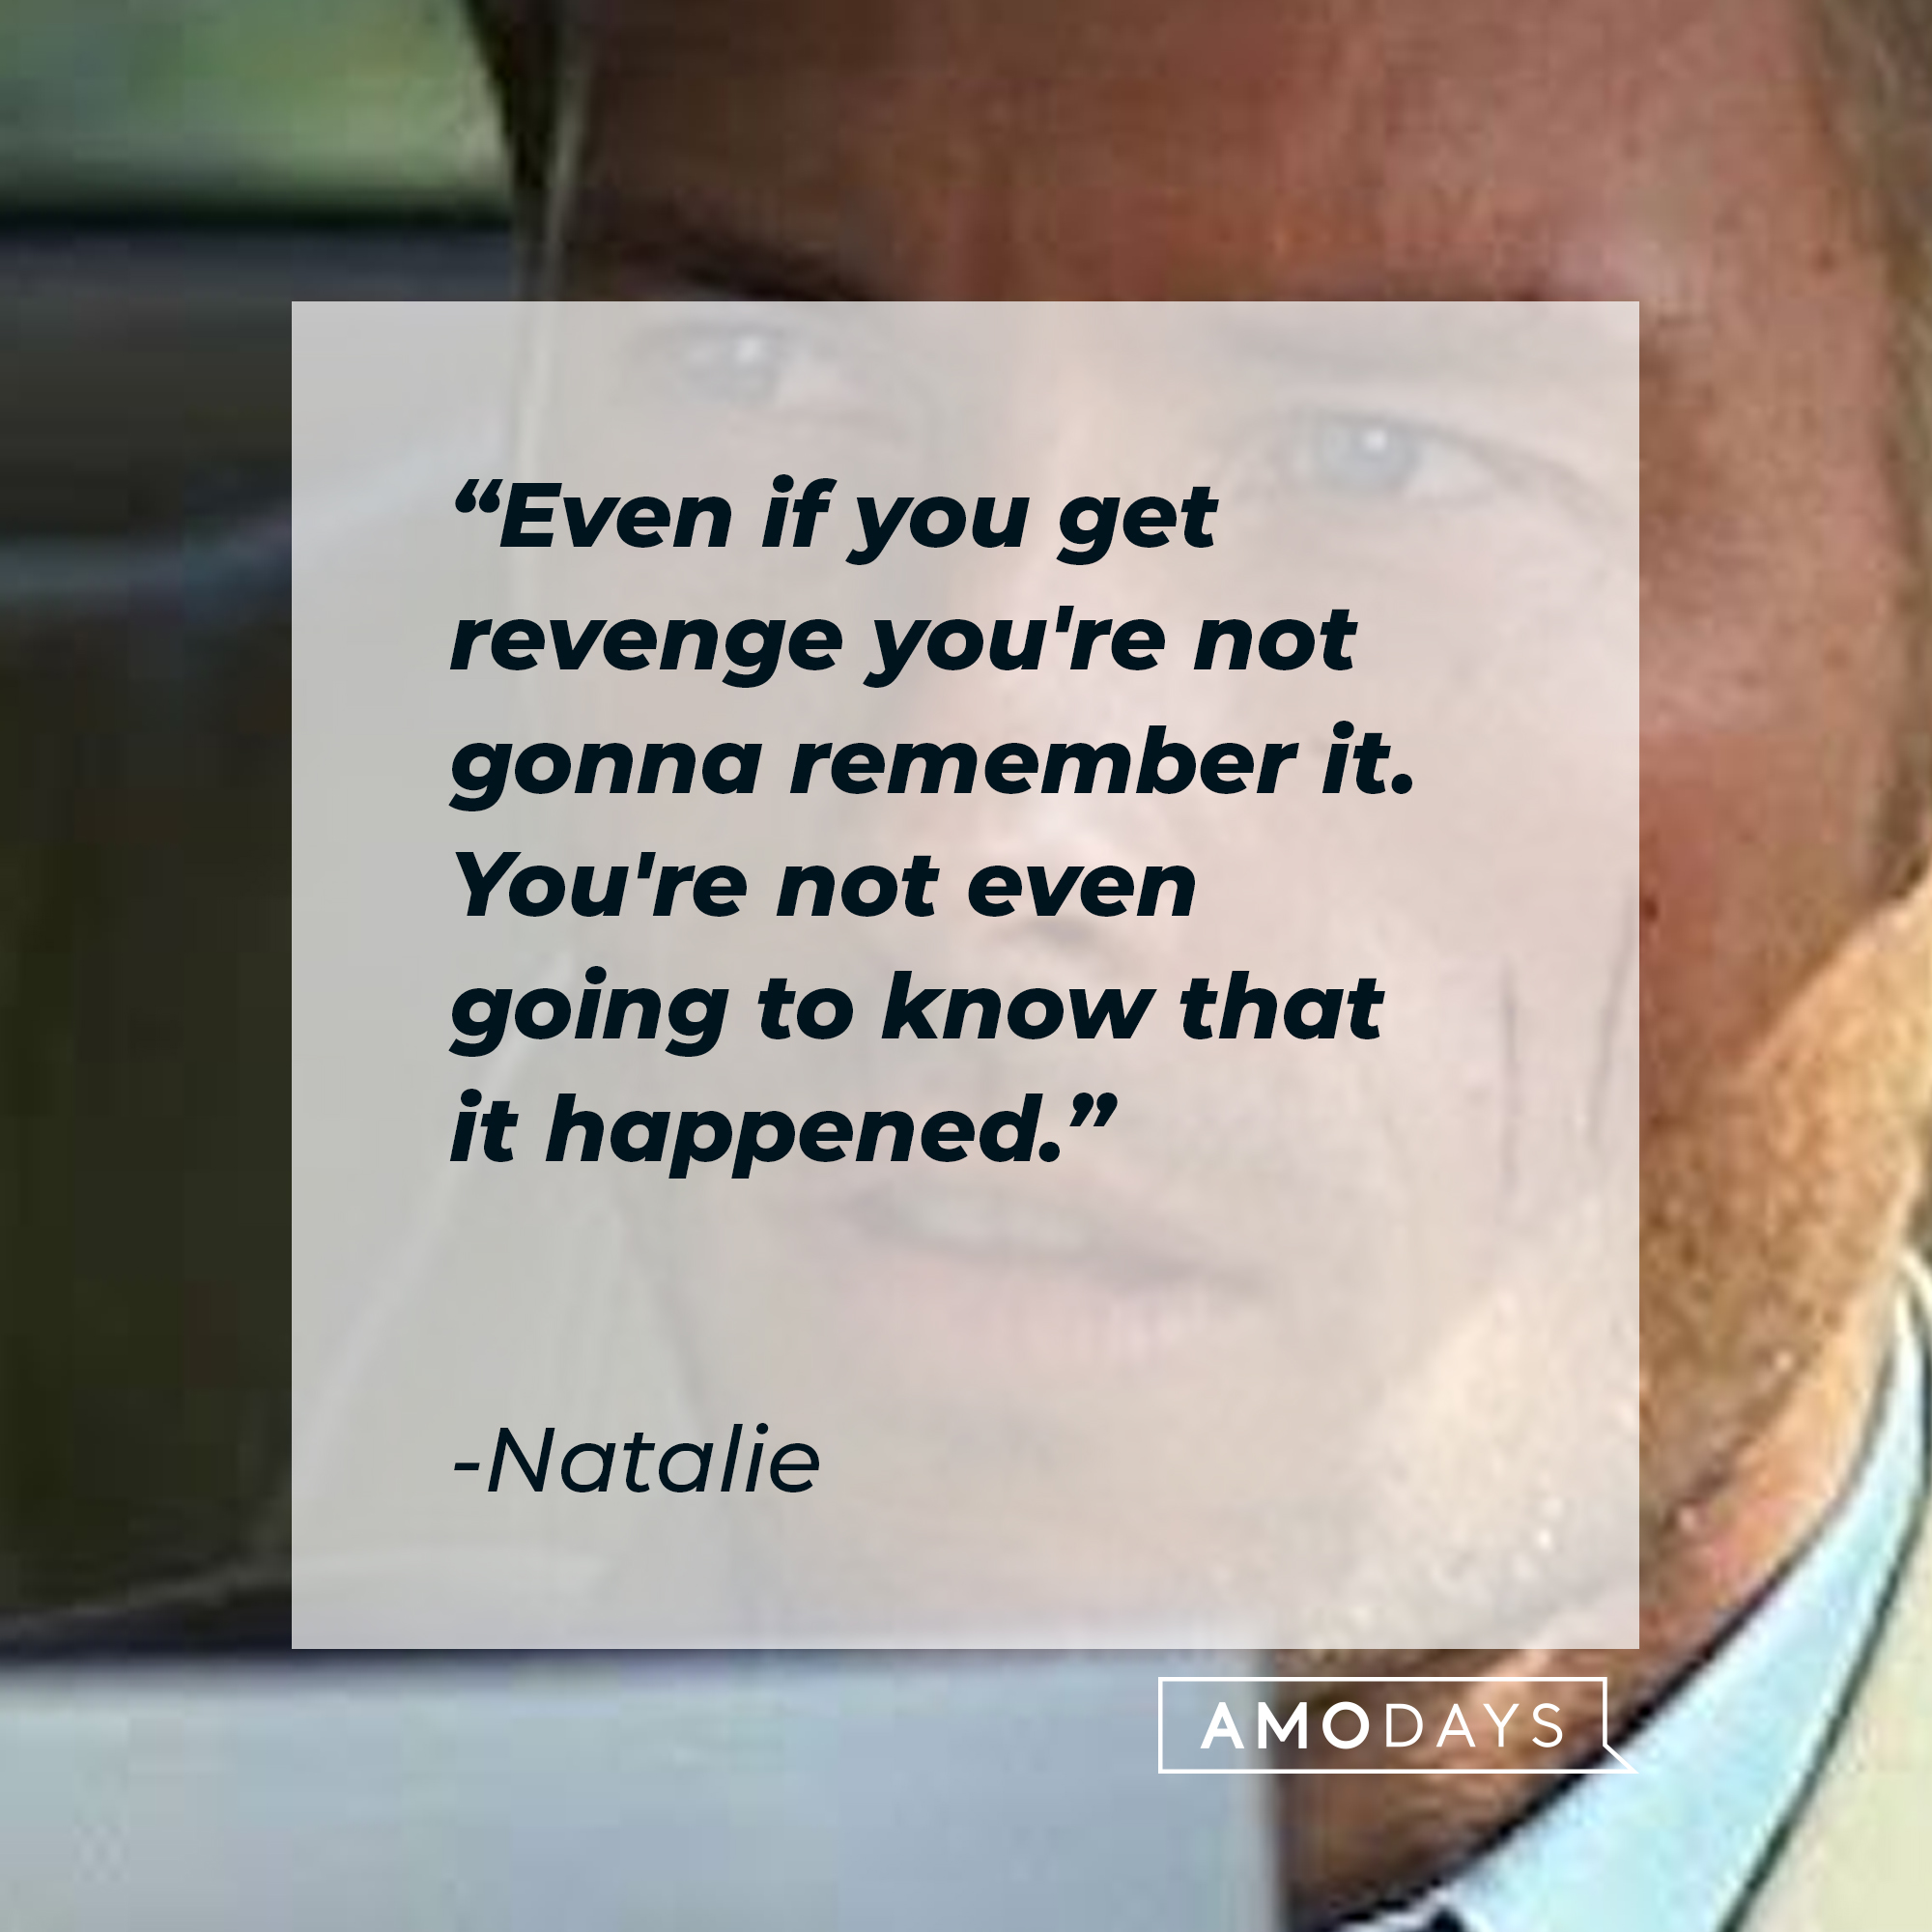 Natalie's quote: "Even if you get revenge you're not gonna remember it. You're not even going to know that it happened." | Source: facebook.com/MementoOfficial